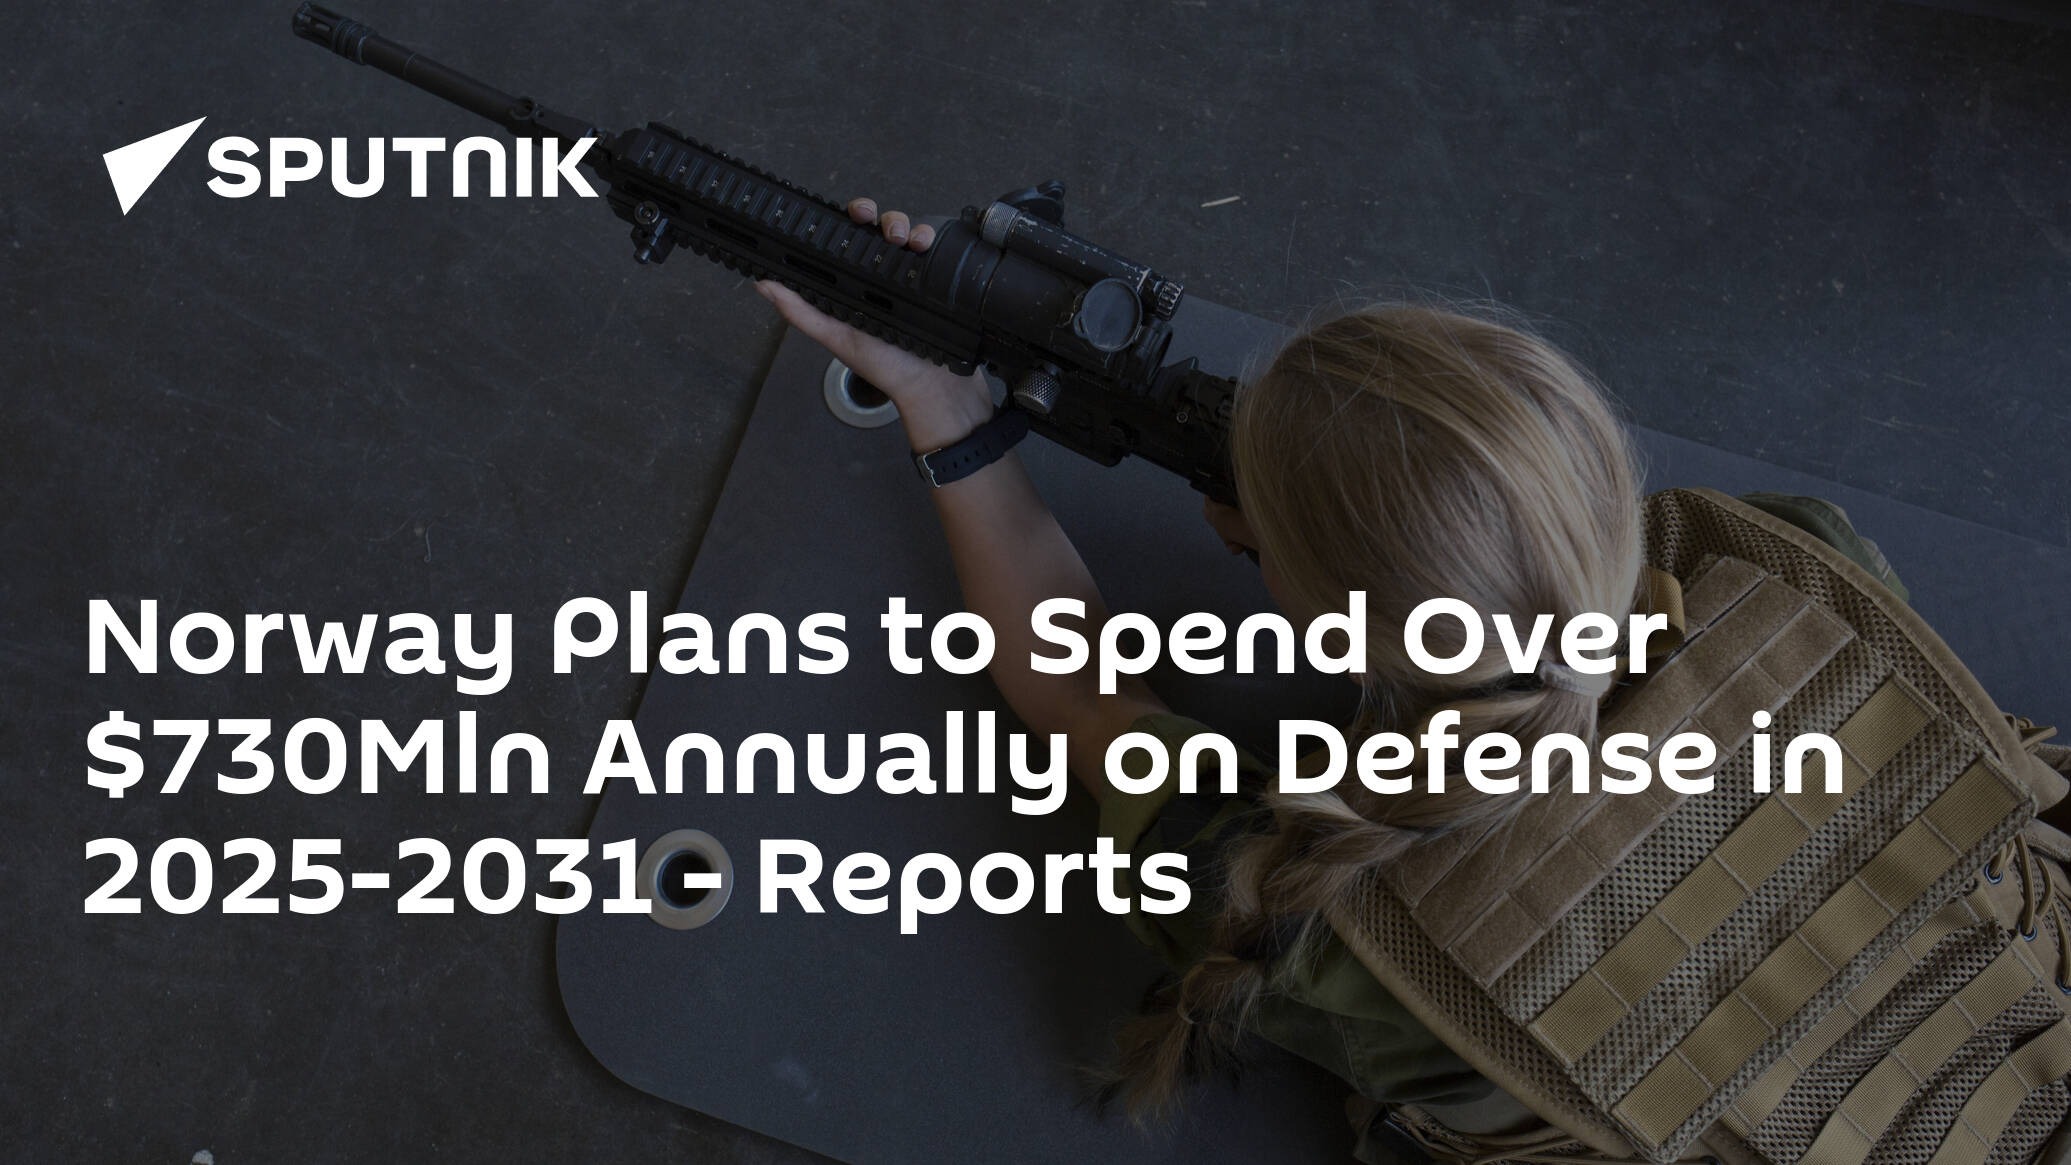 Norway Plans to Spend Over 0Mln Annually on Defense in 2025-2031 – Reports